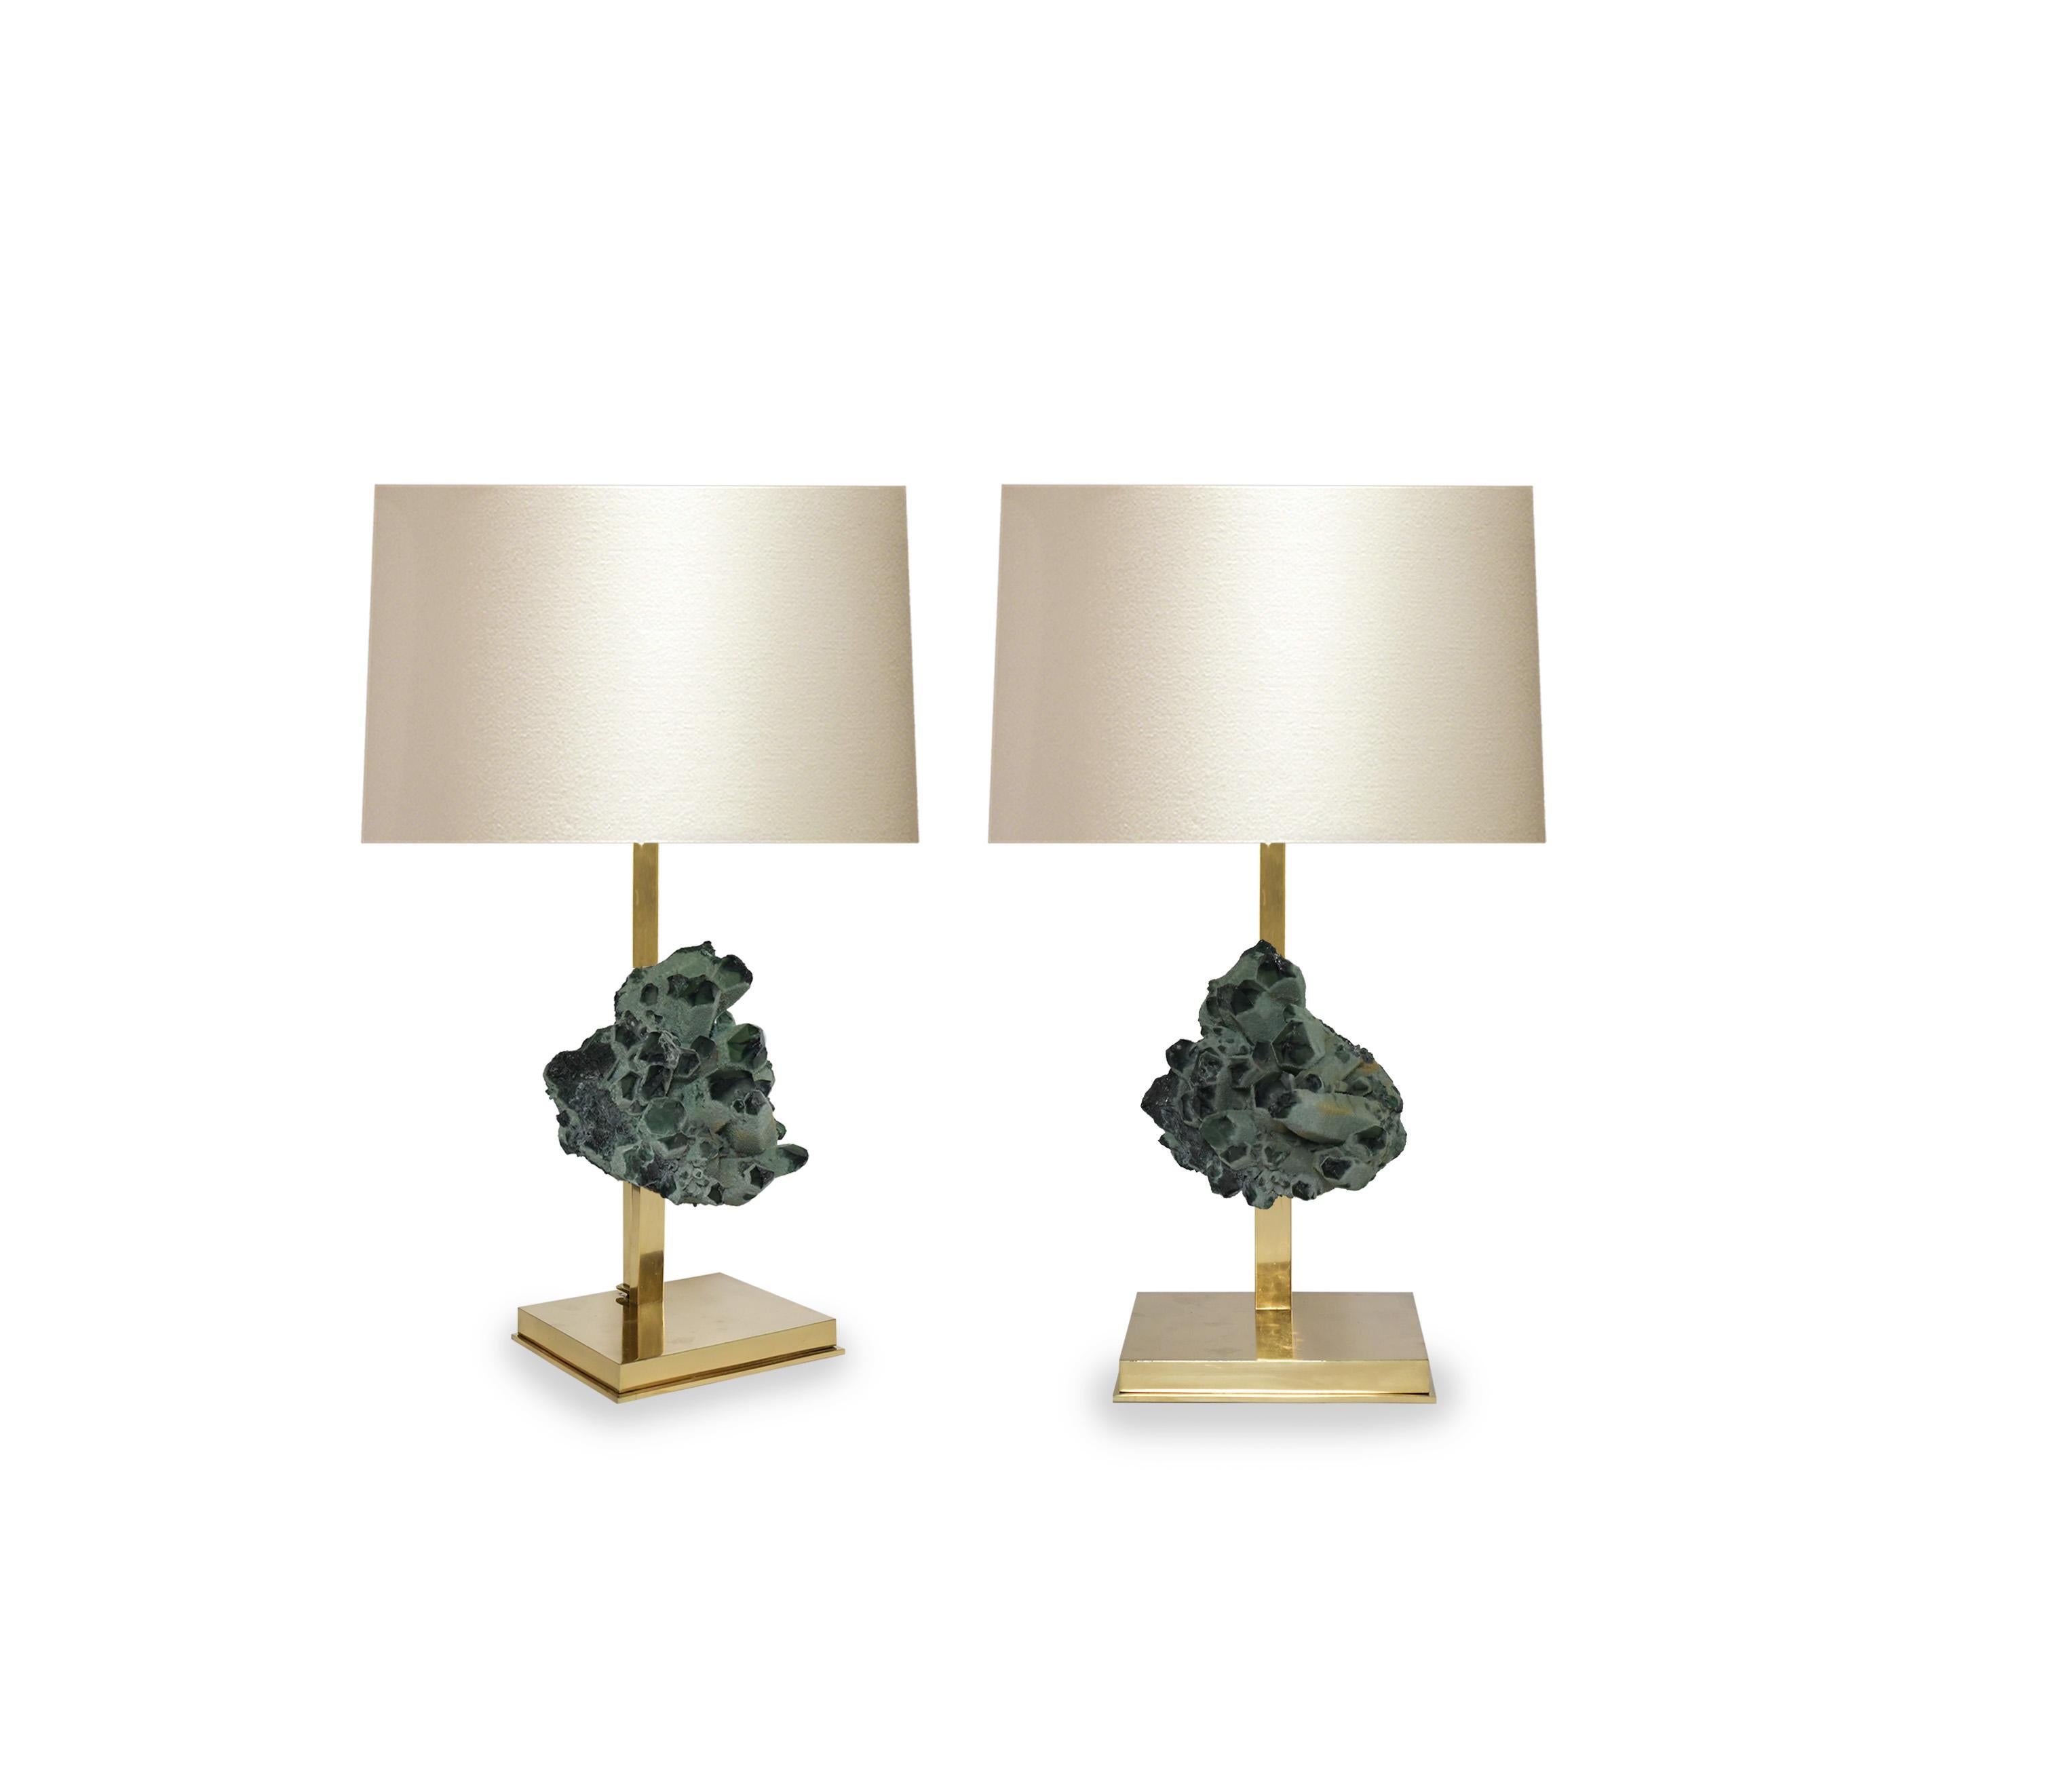 Pair of rare natural green rock crystal cluster mount as lamps with polished brass bases. Create by Phoenix Gallery, NYC.
Each lamp installs two sockets.
Lampshade do not include.